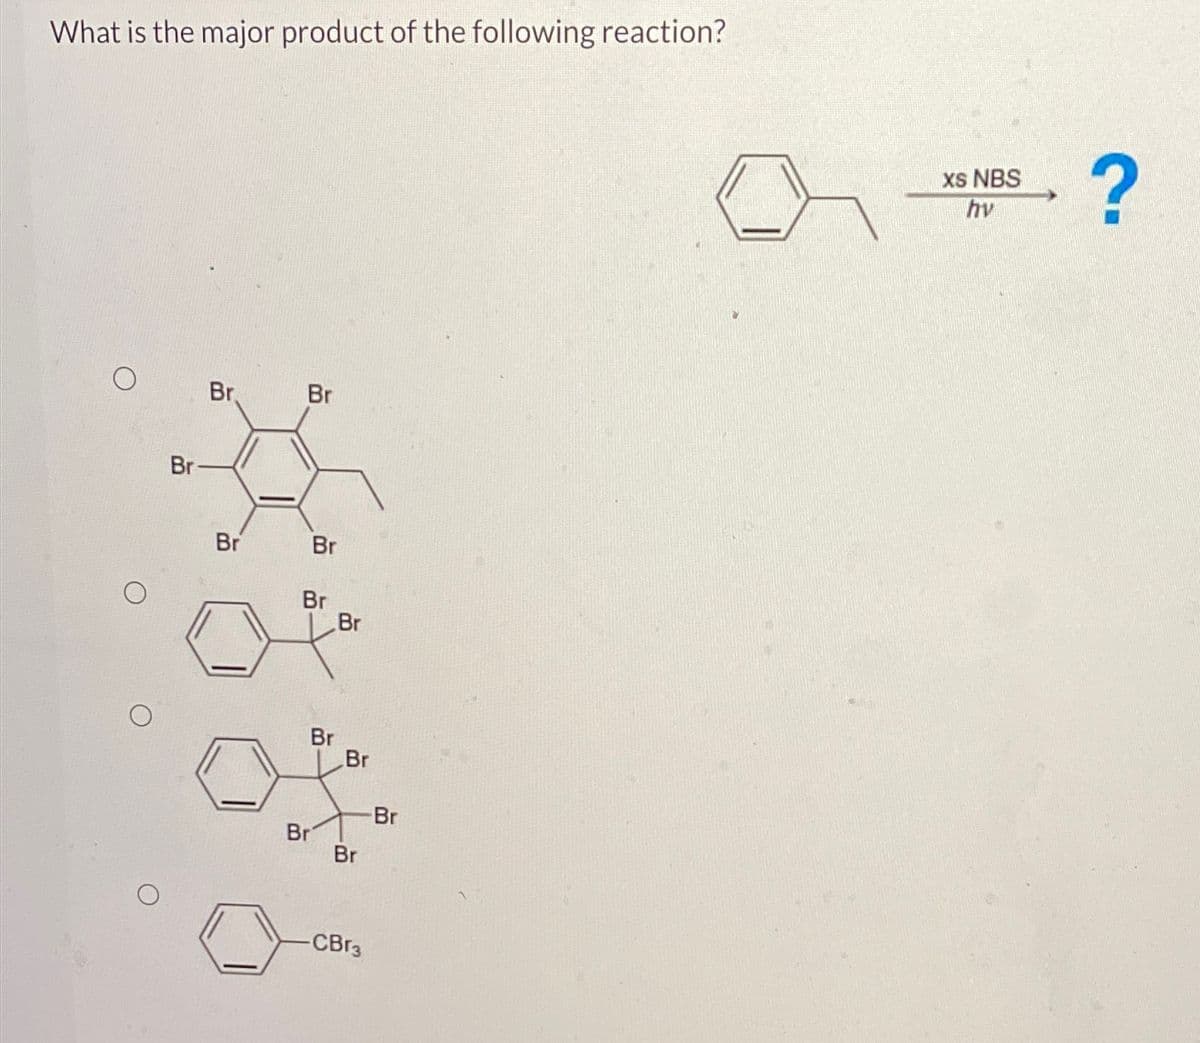 What is the major product of the following reaction?
Br
Br
Br
Br
Br
Br
Br
Br
Br
Br
Br
-CBr3
Br
xs NBS
hv
?